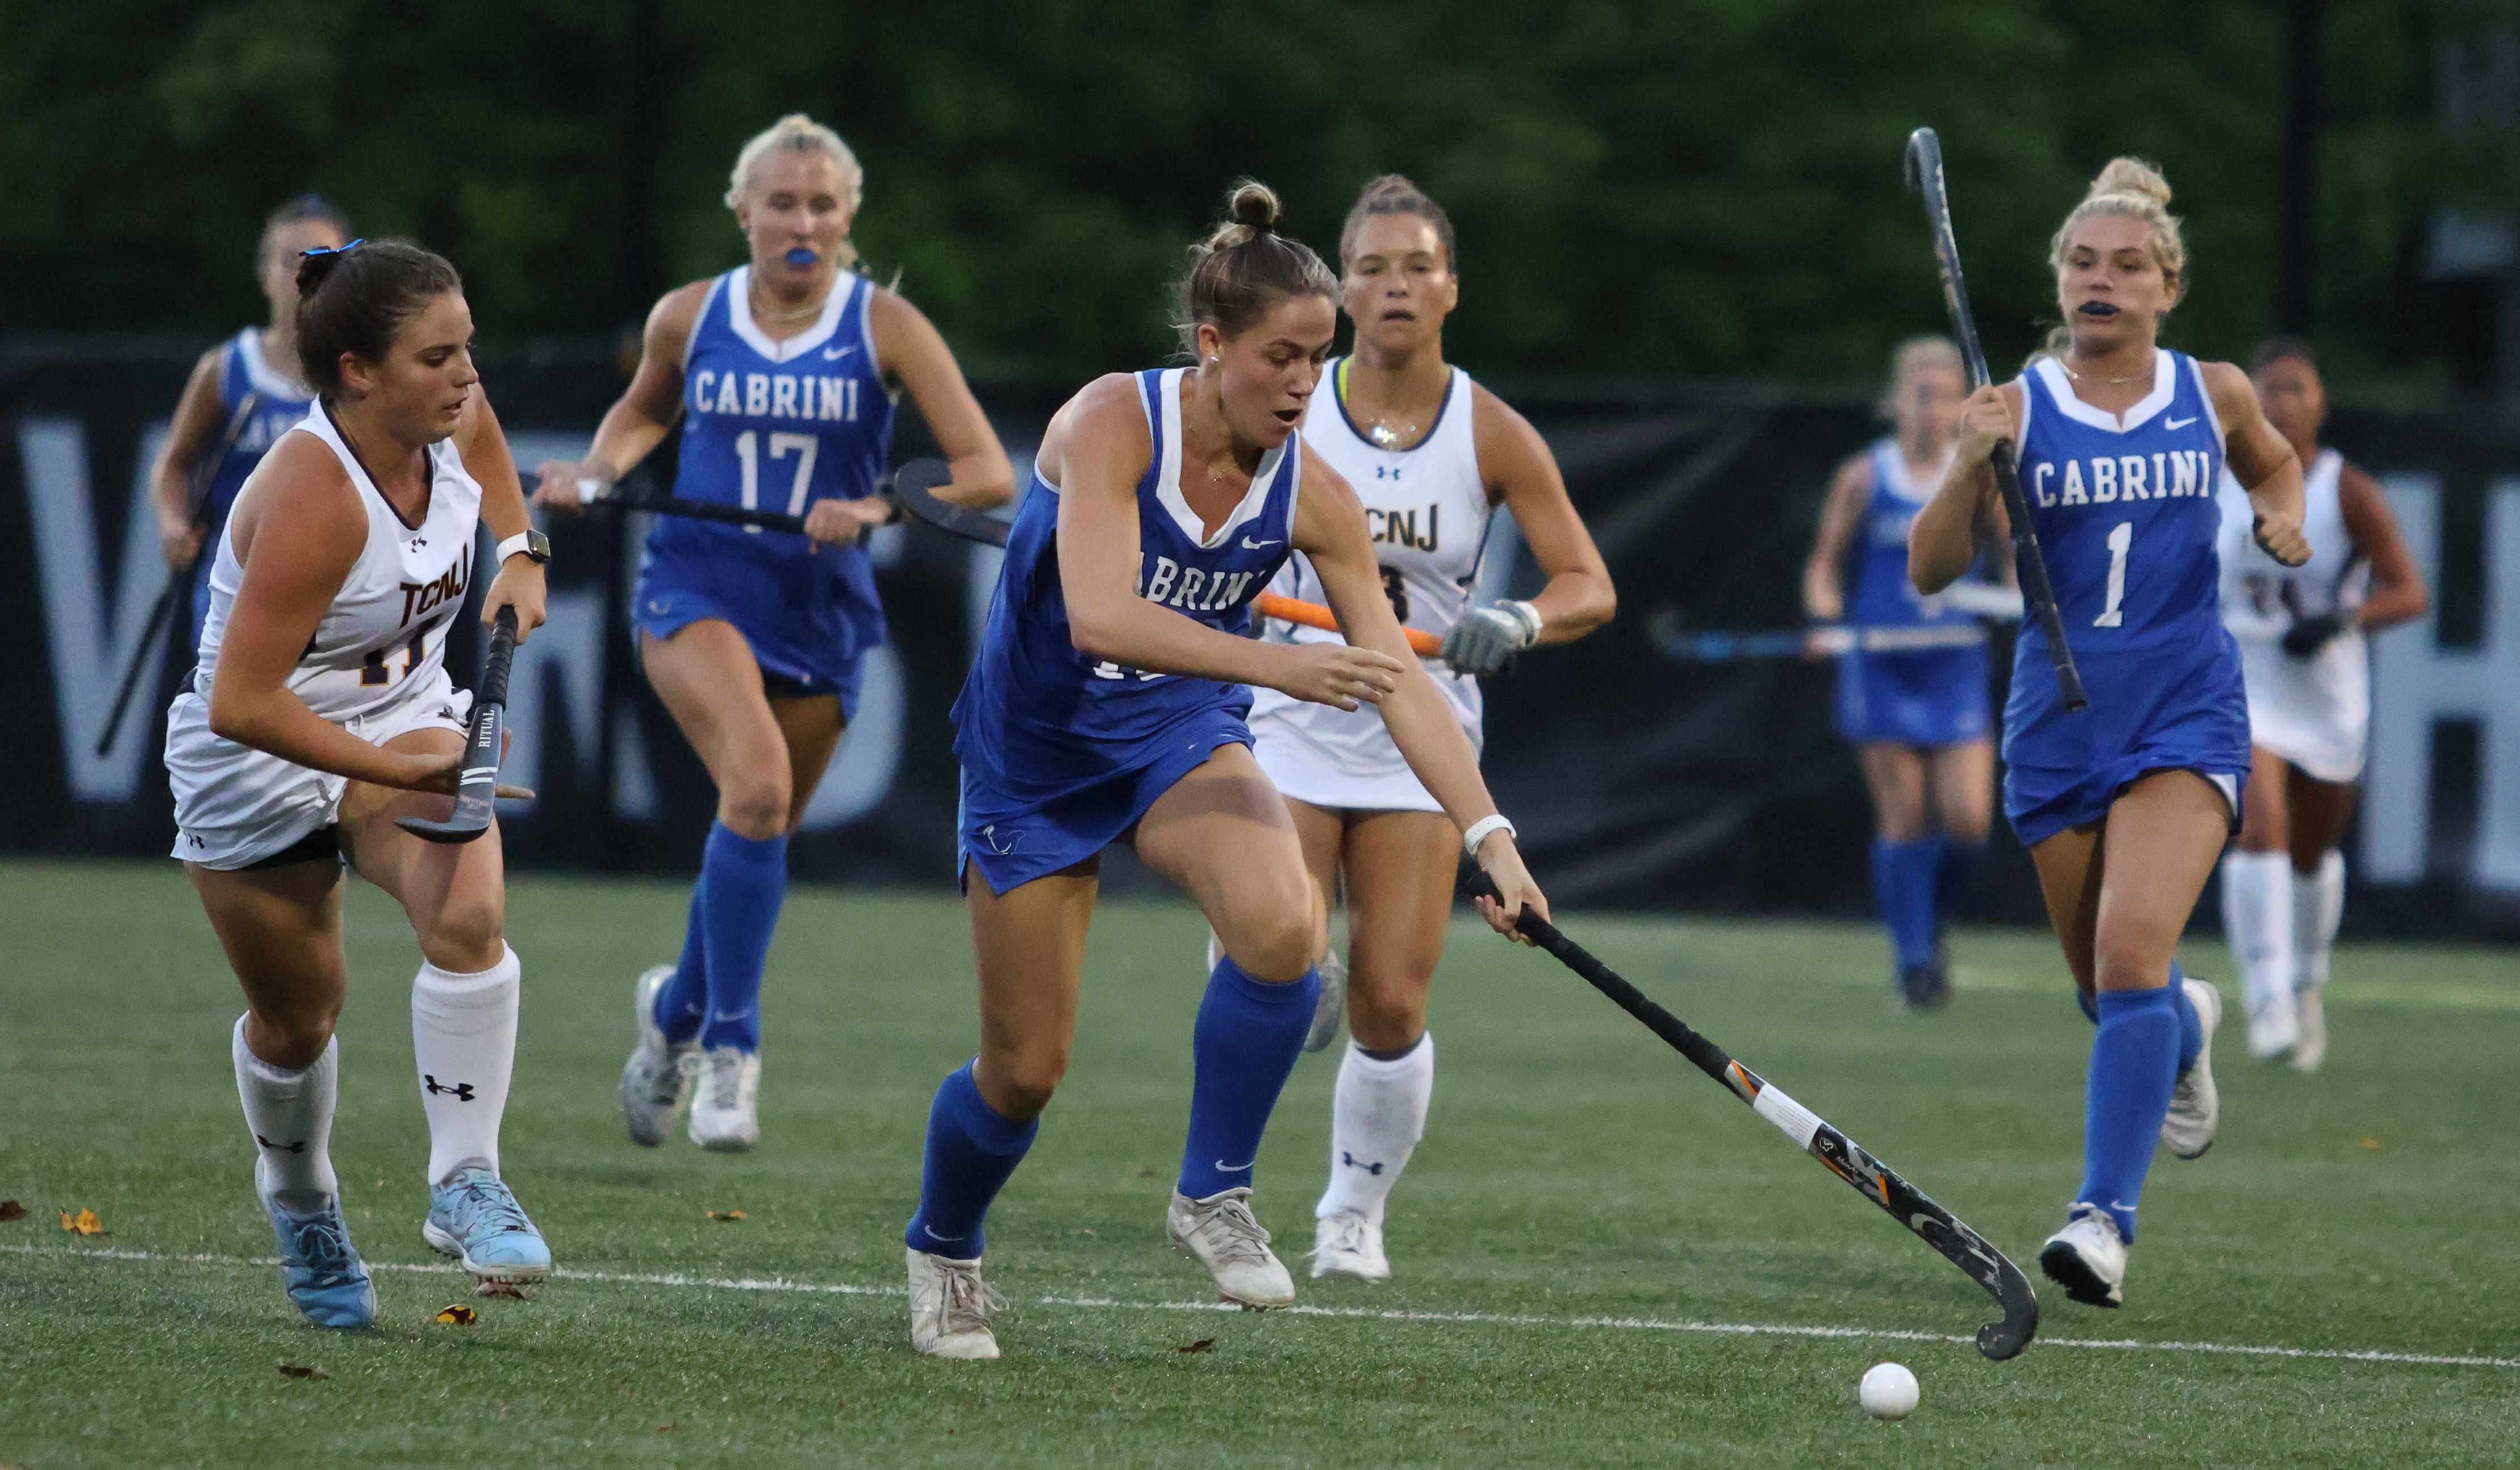 Cabrini Women's Field Hockey Team Takes Down College of New Jersey img 2846 A